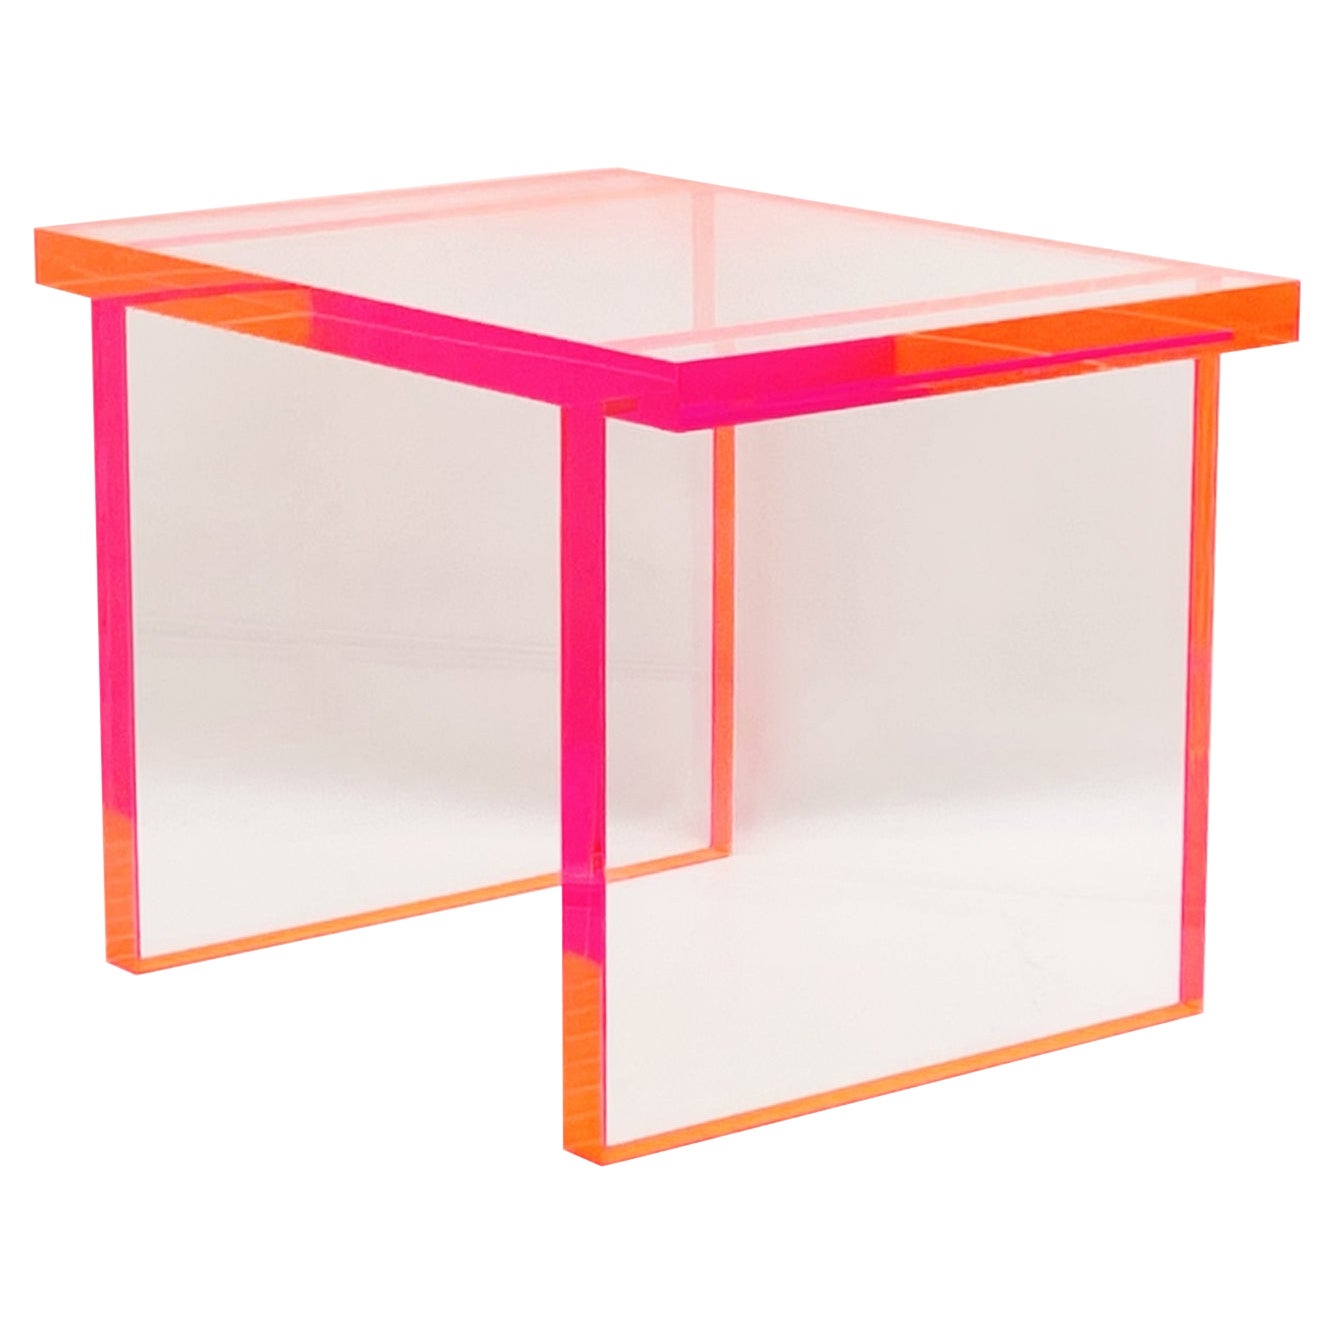 Fluorescent Pink & Clear Lucite Bench by Amparo Calderon Tapia For Sale